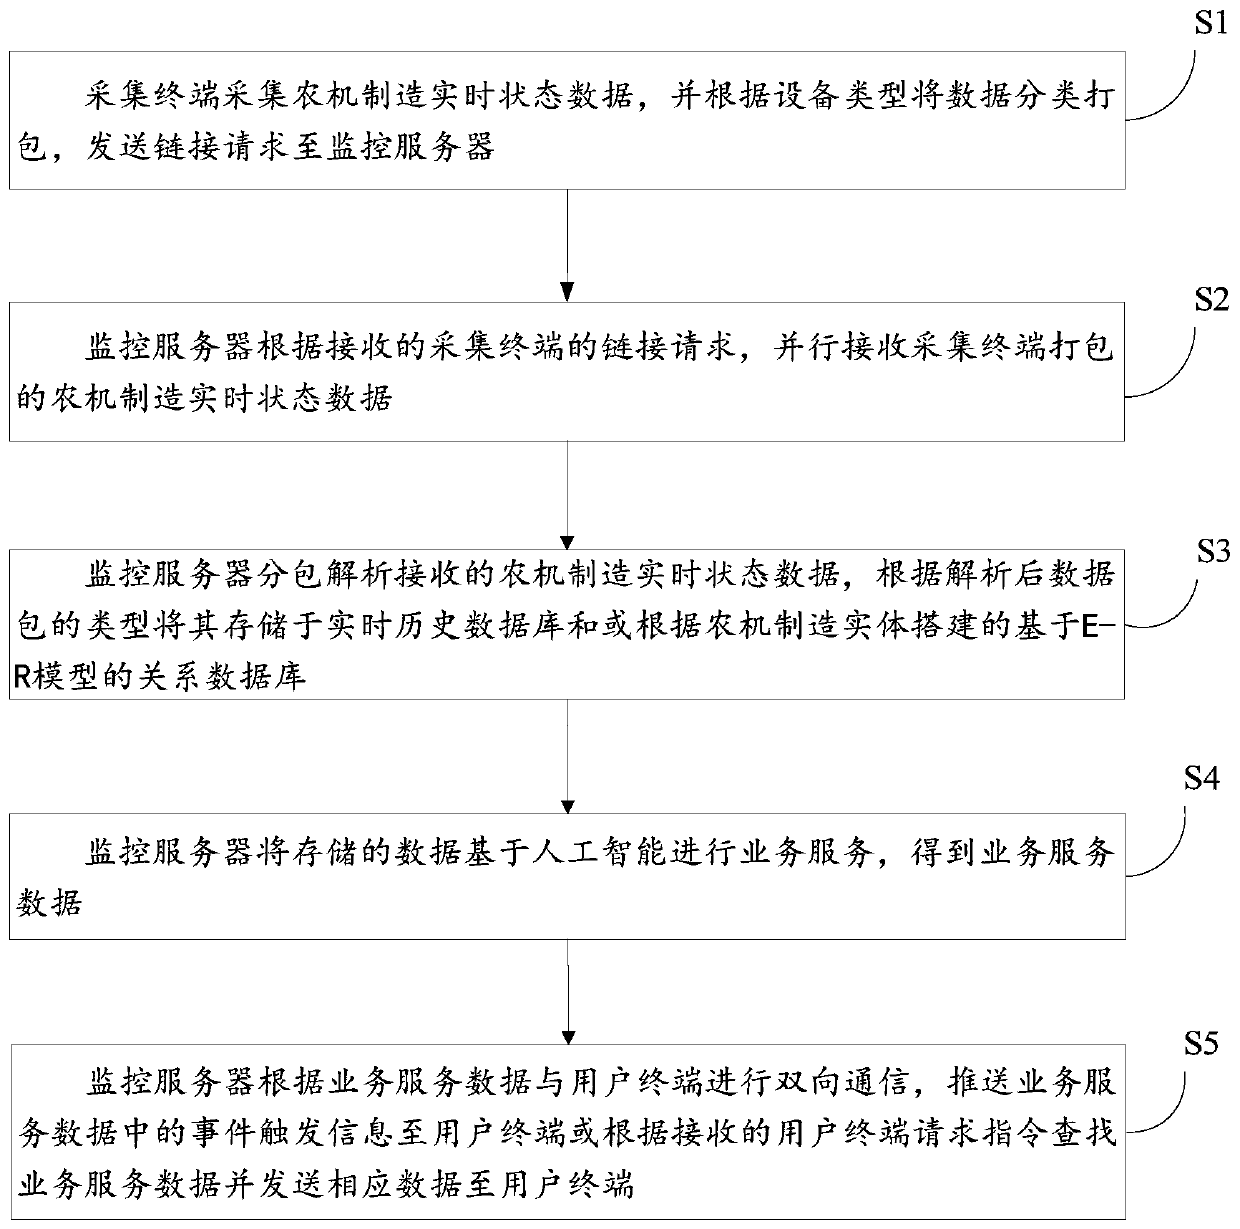 Internet of Things monitoring method and system for agricultural machinery manufacturing